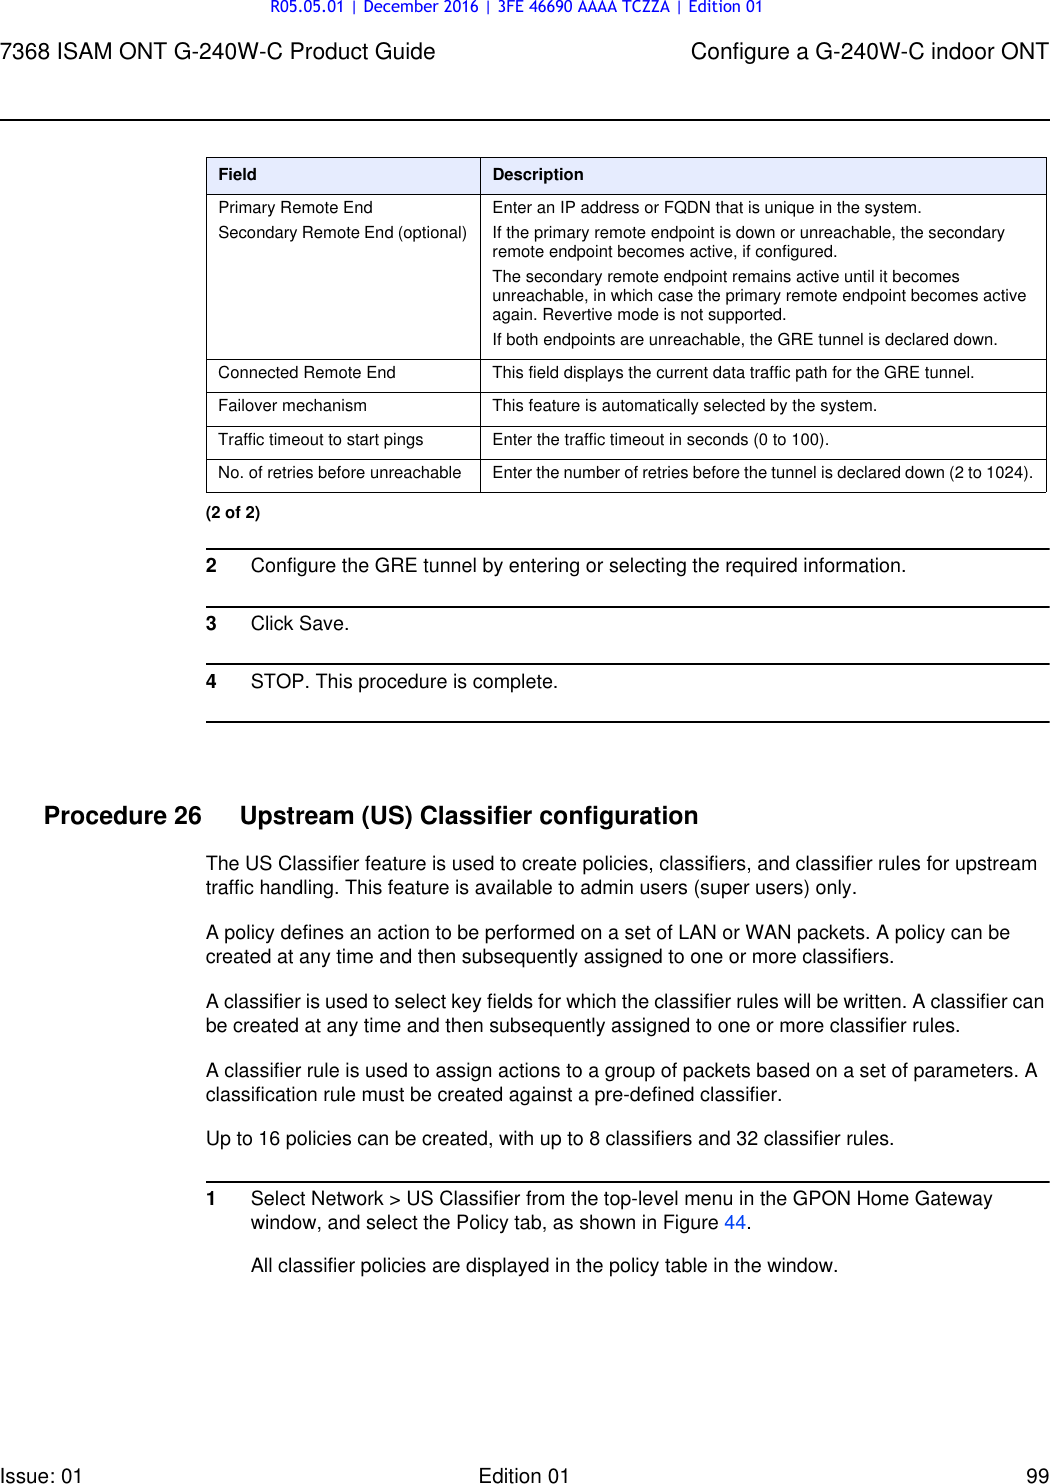 Page 99 of Nokia Bell G240W-C GPON ONU User Manual 7368 ISAM ONT G 240W B Product Guide